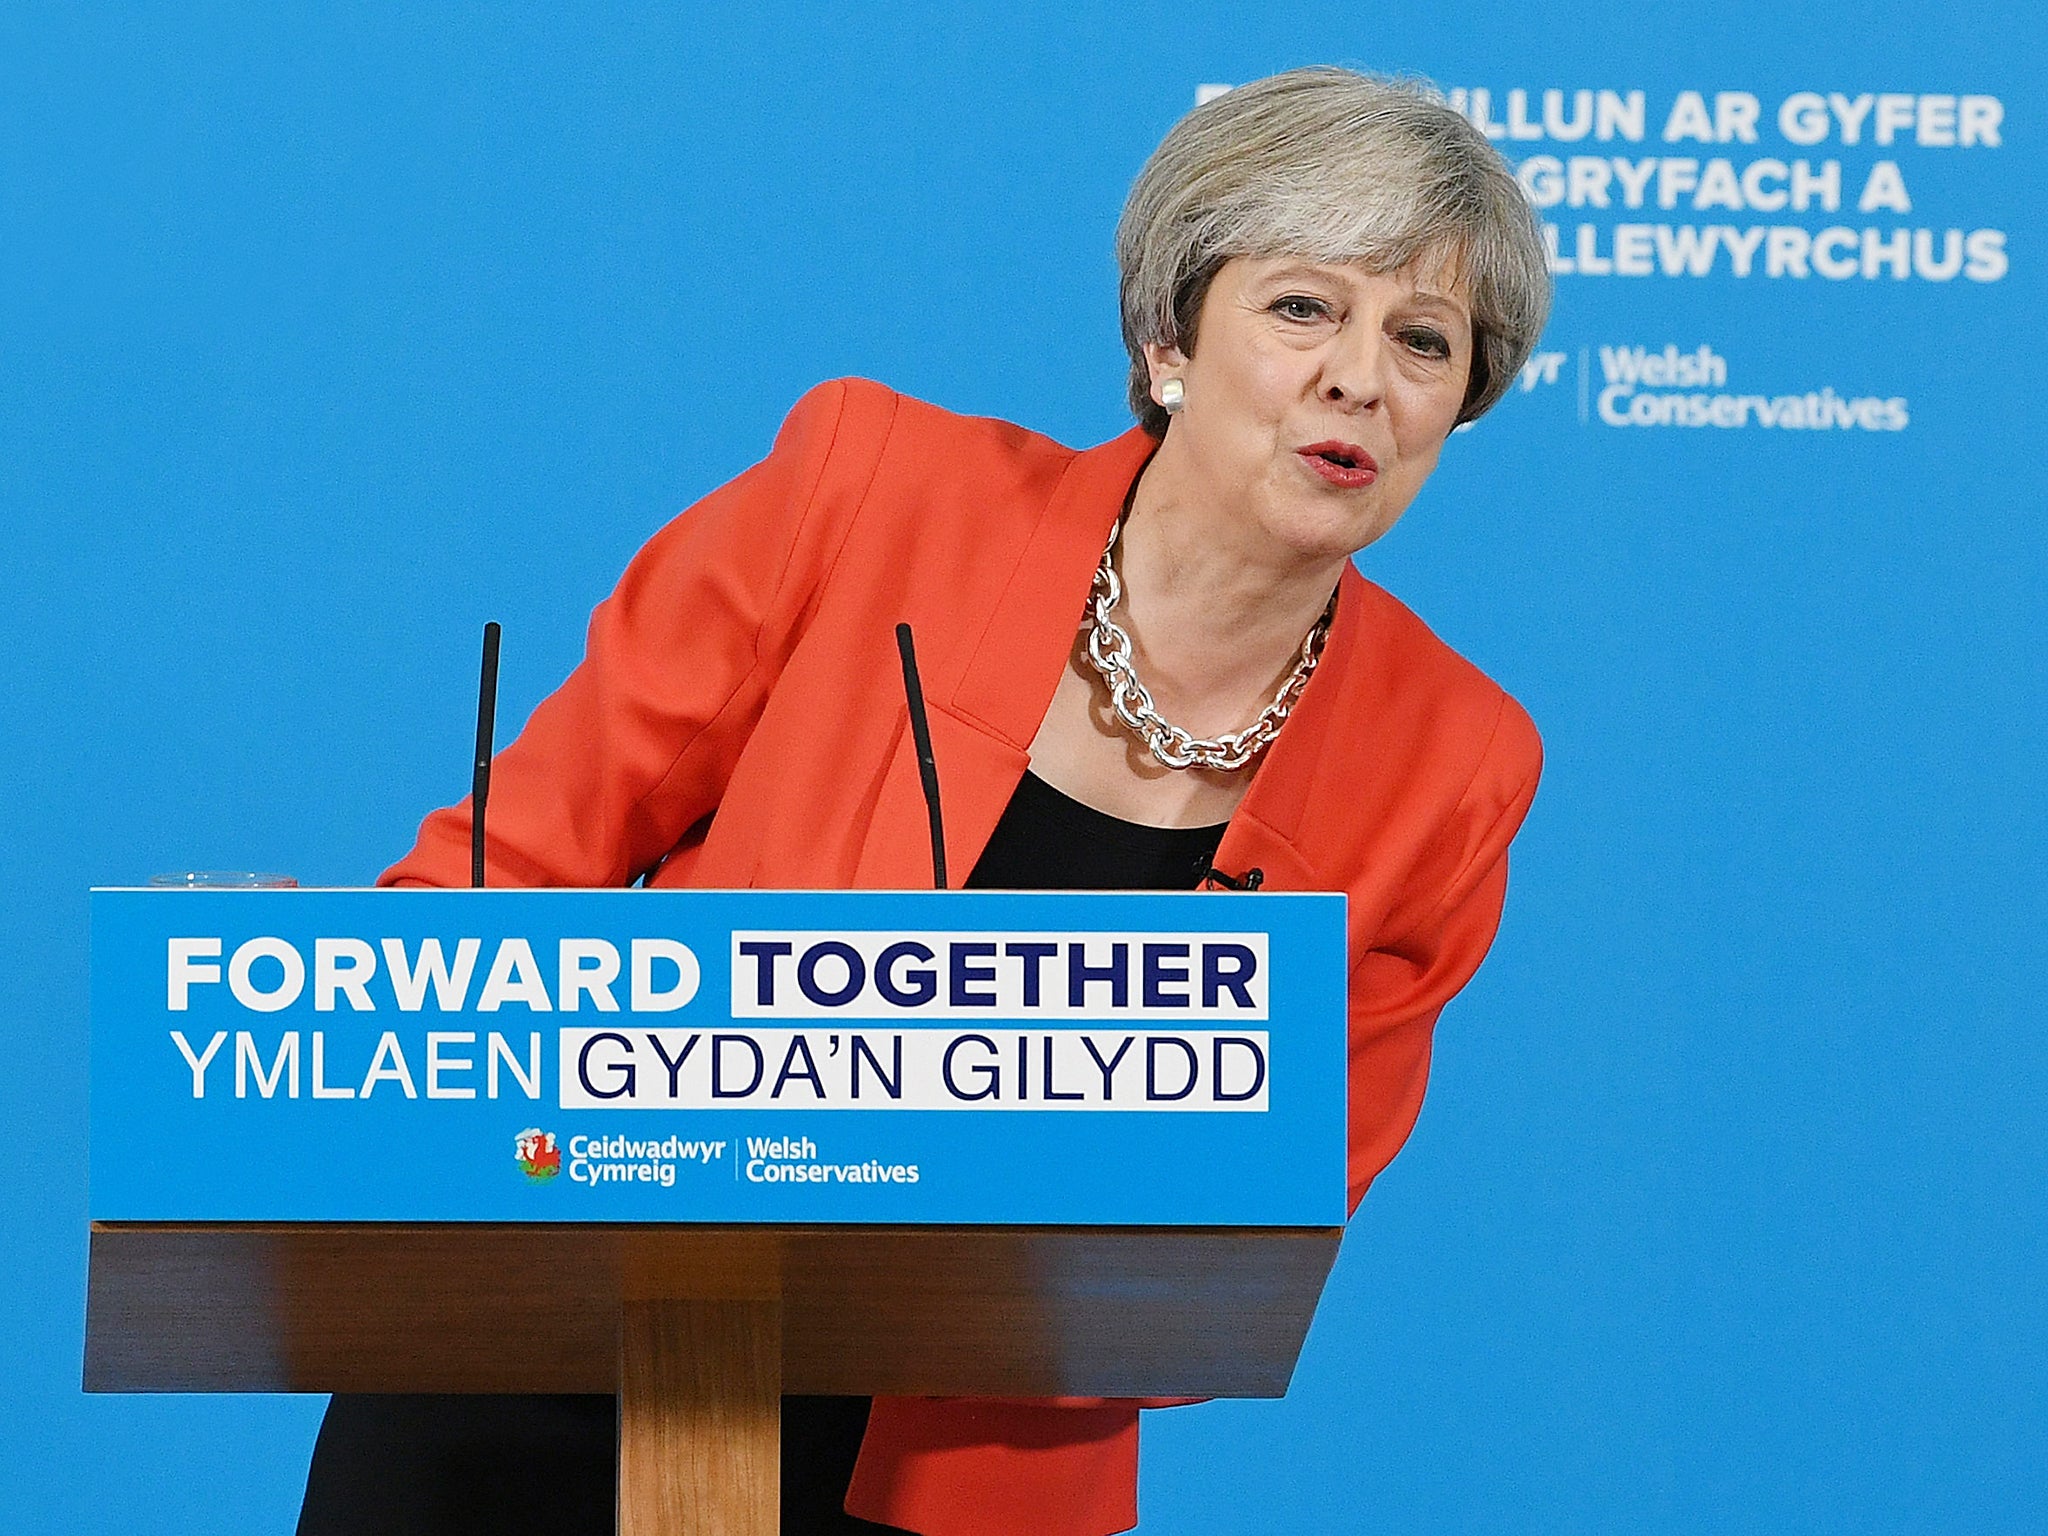 Theresa May accused of lying about &apos;dementia tax&apos; care amid backlash over U-turn